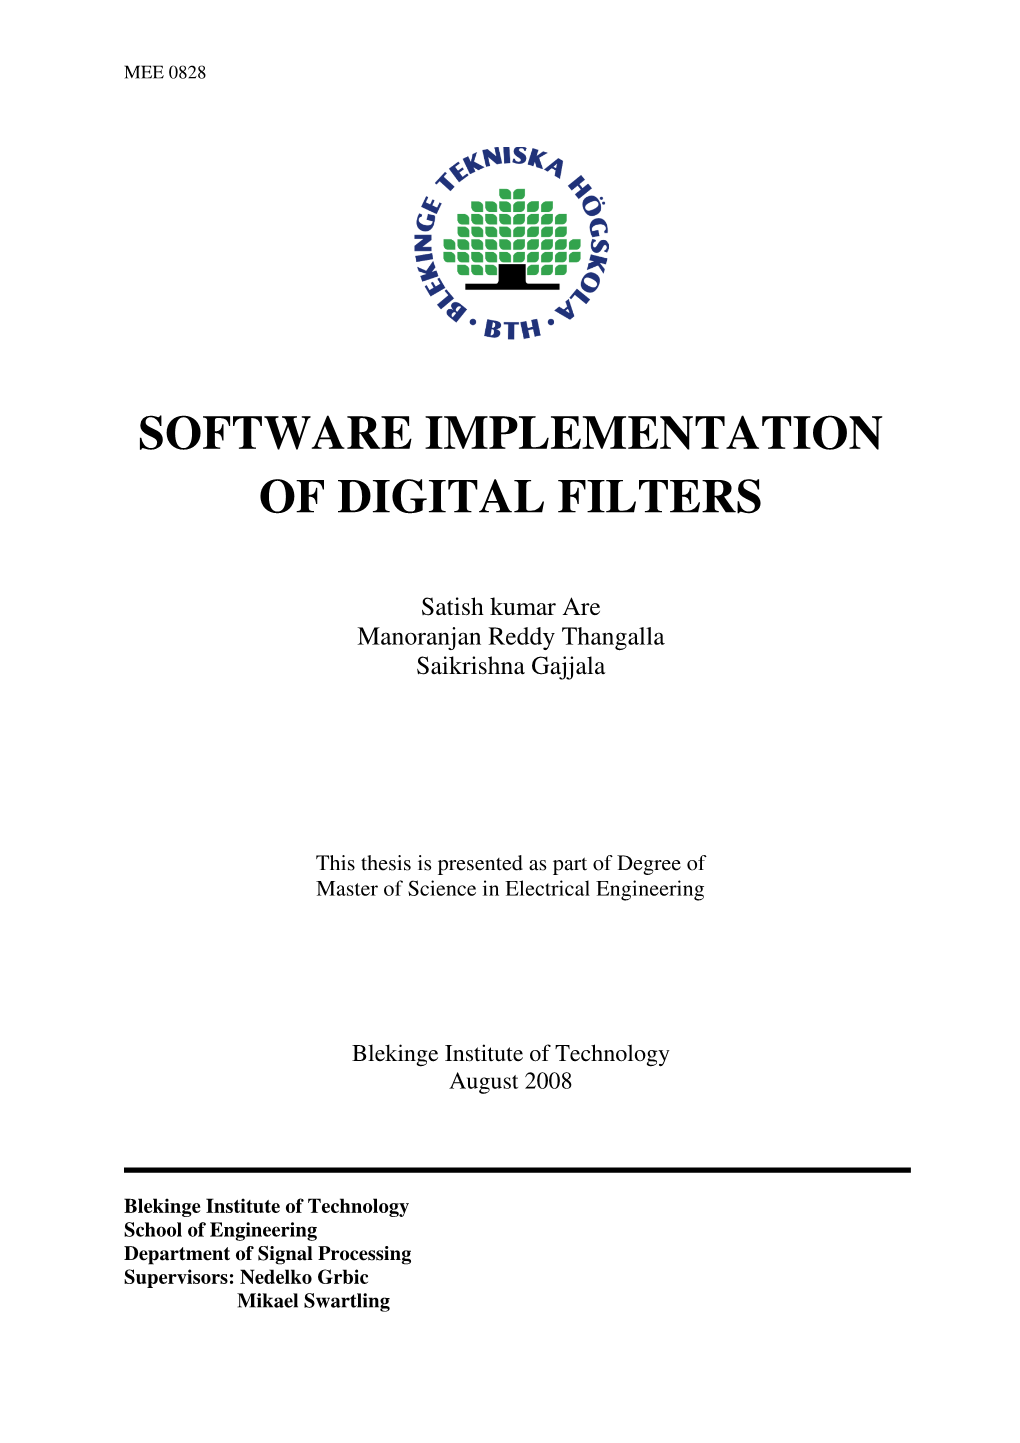 Software Implementation of Digital Filters Using Matlab GUI in a User Friendly Environment